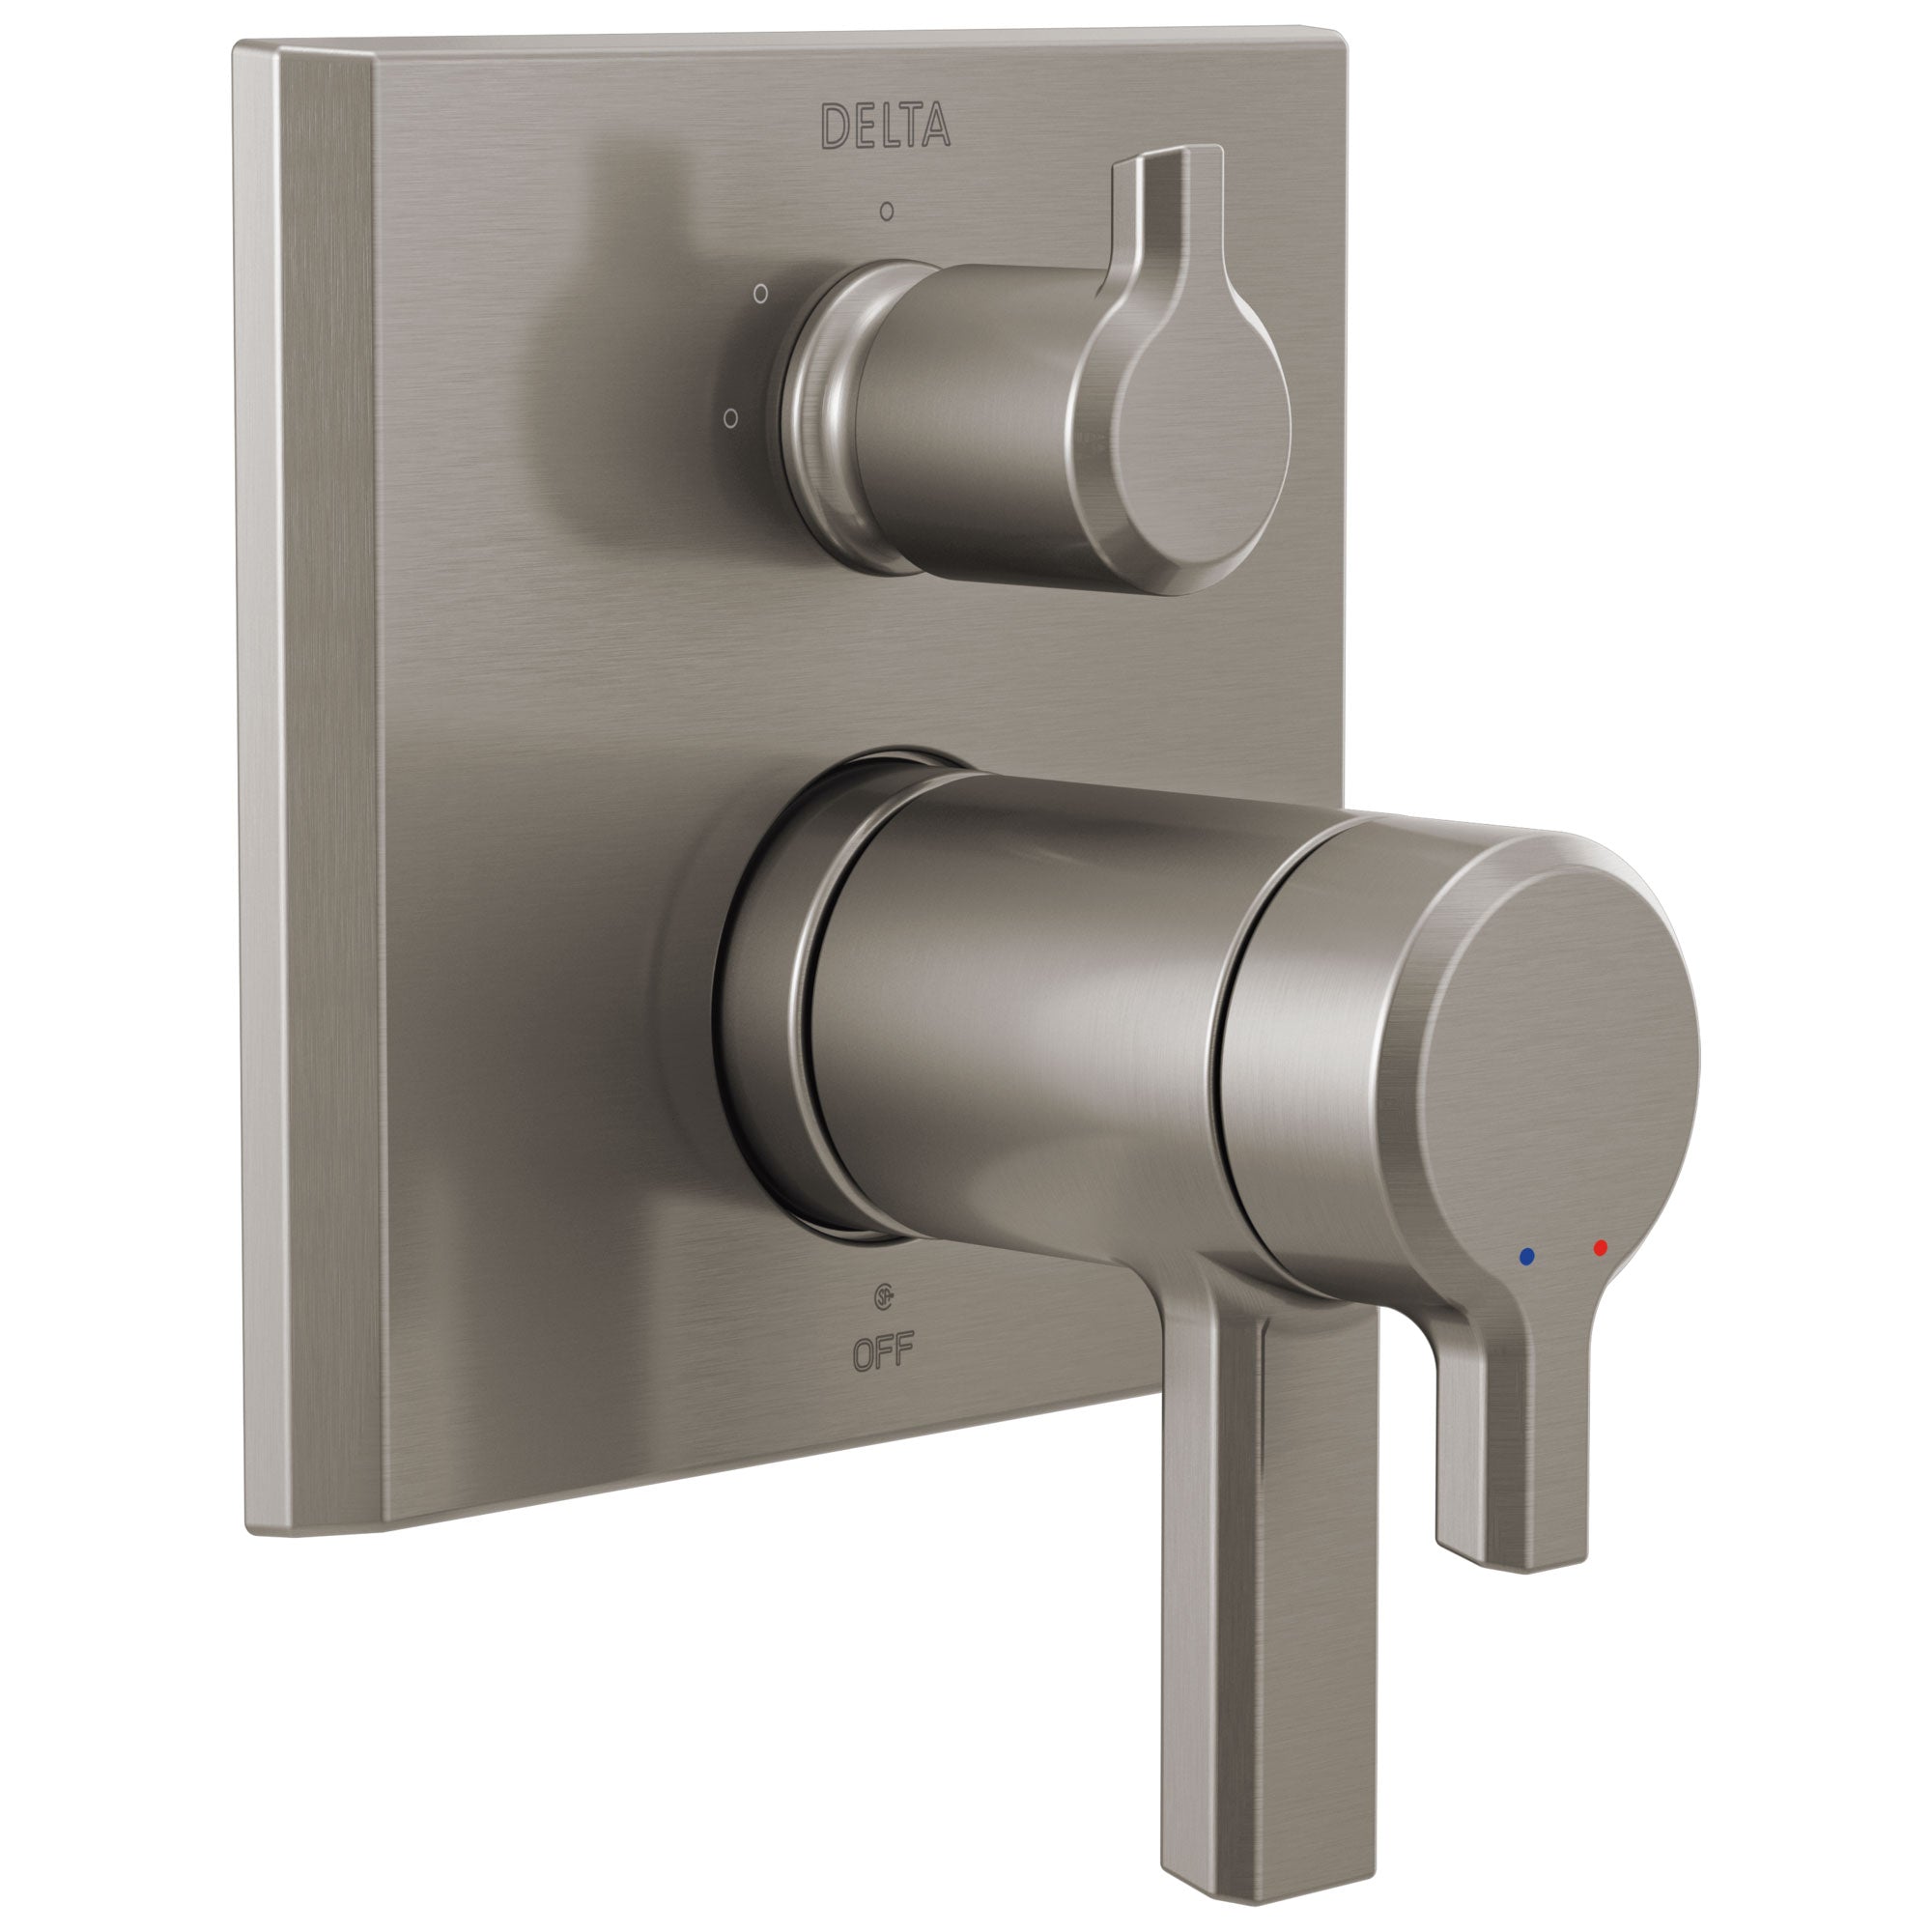 Delta Pivotal Stainless Steel Finish TempAssure 17T Series Shower Control Trim Kit with 3-Setting Integrated Diverter (Requires Valve) DT27T899SS